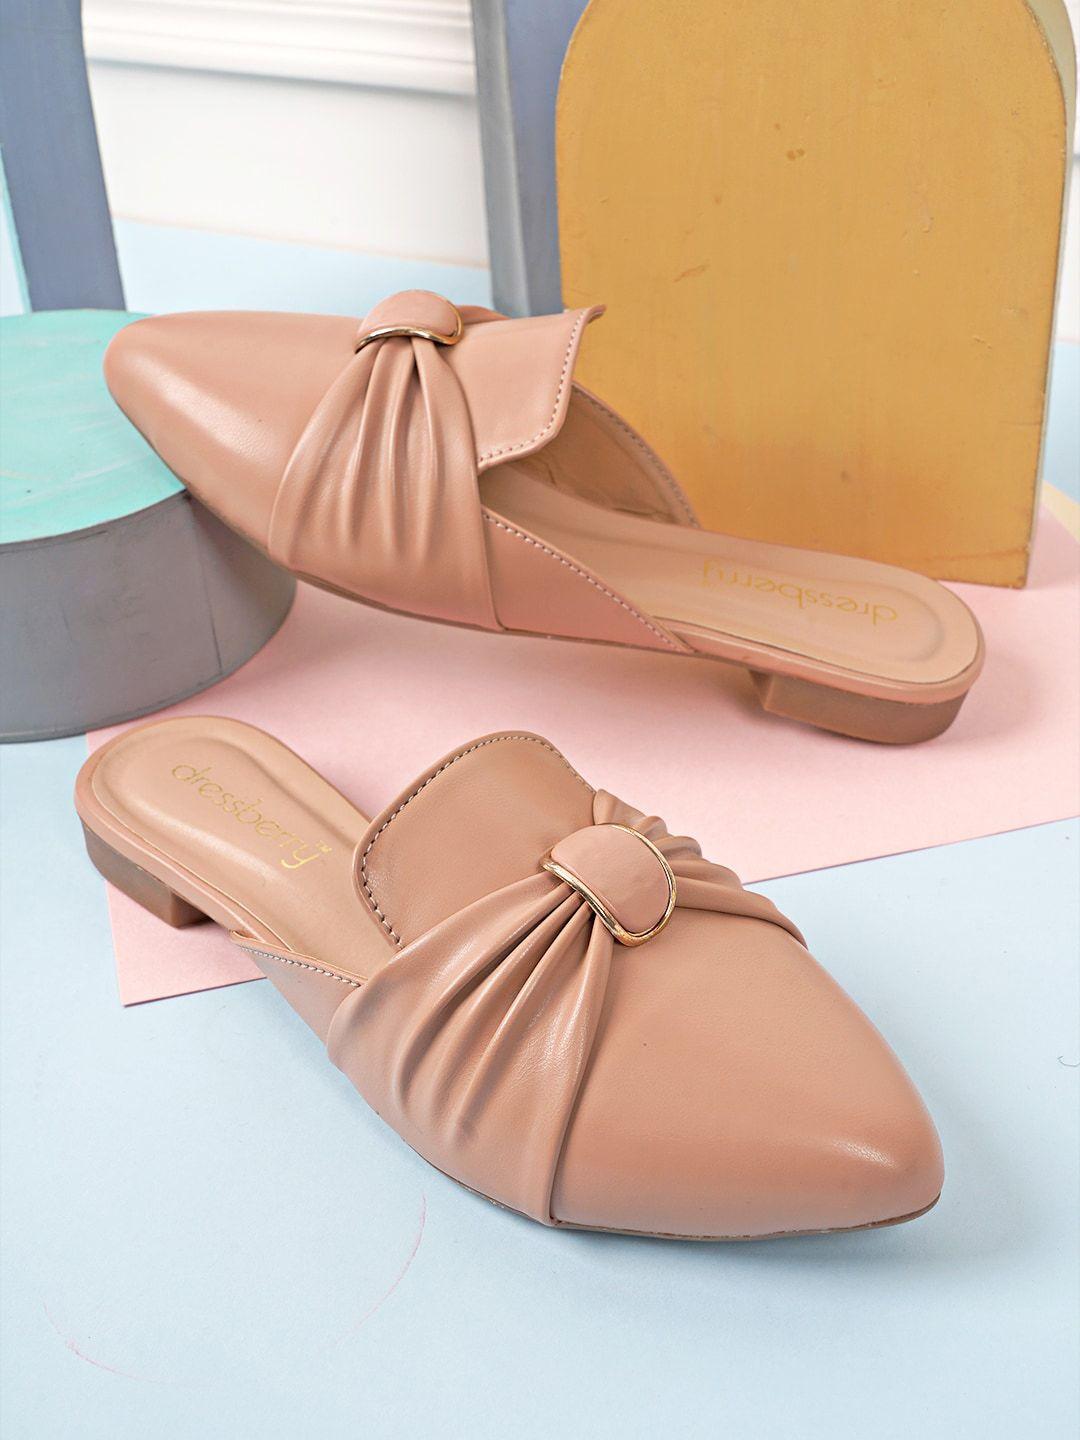 dressberry women beige mules with bows flats